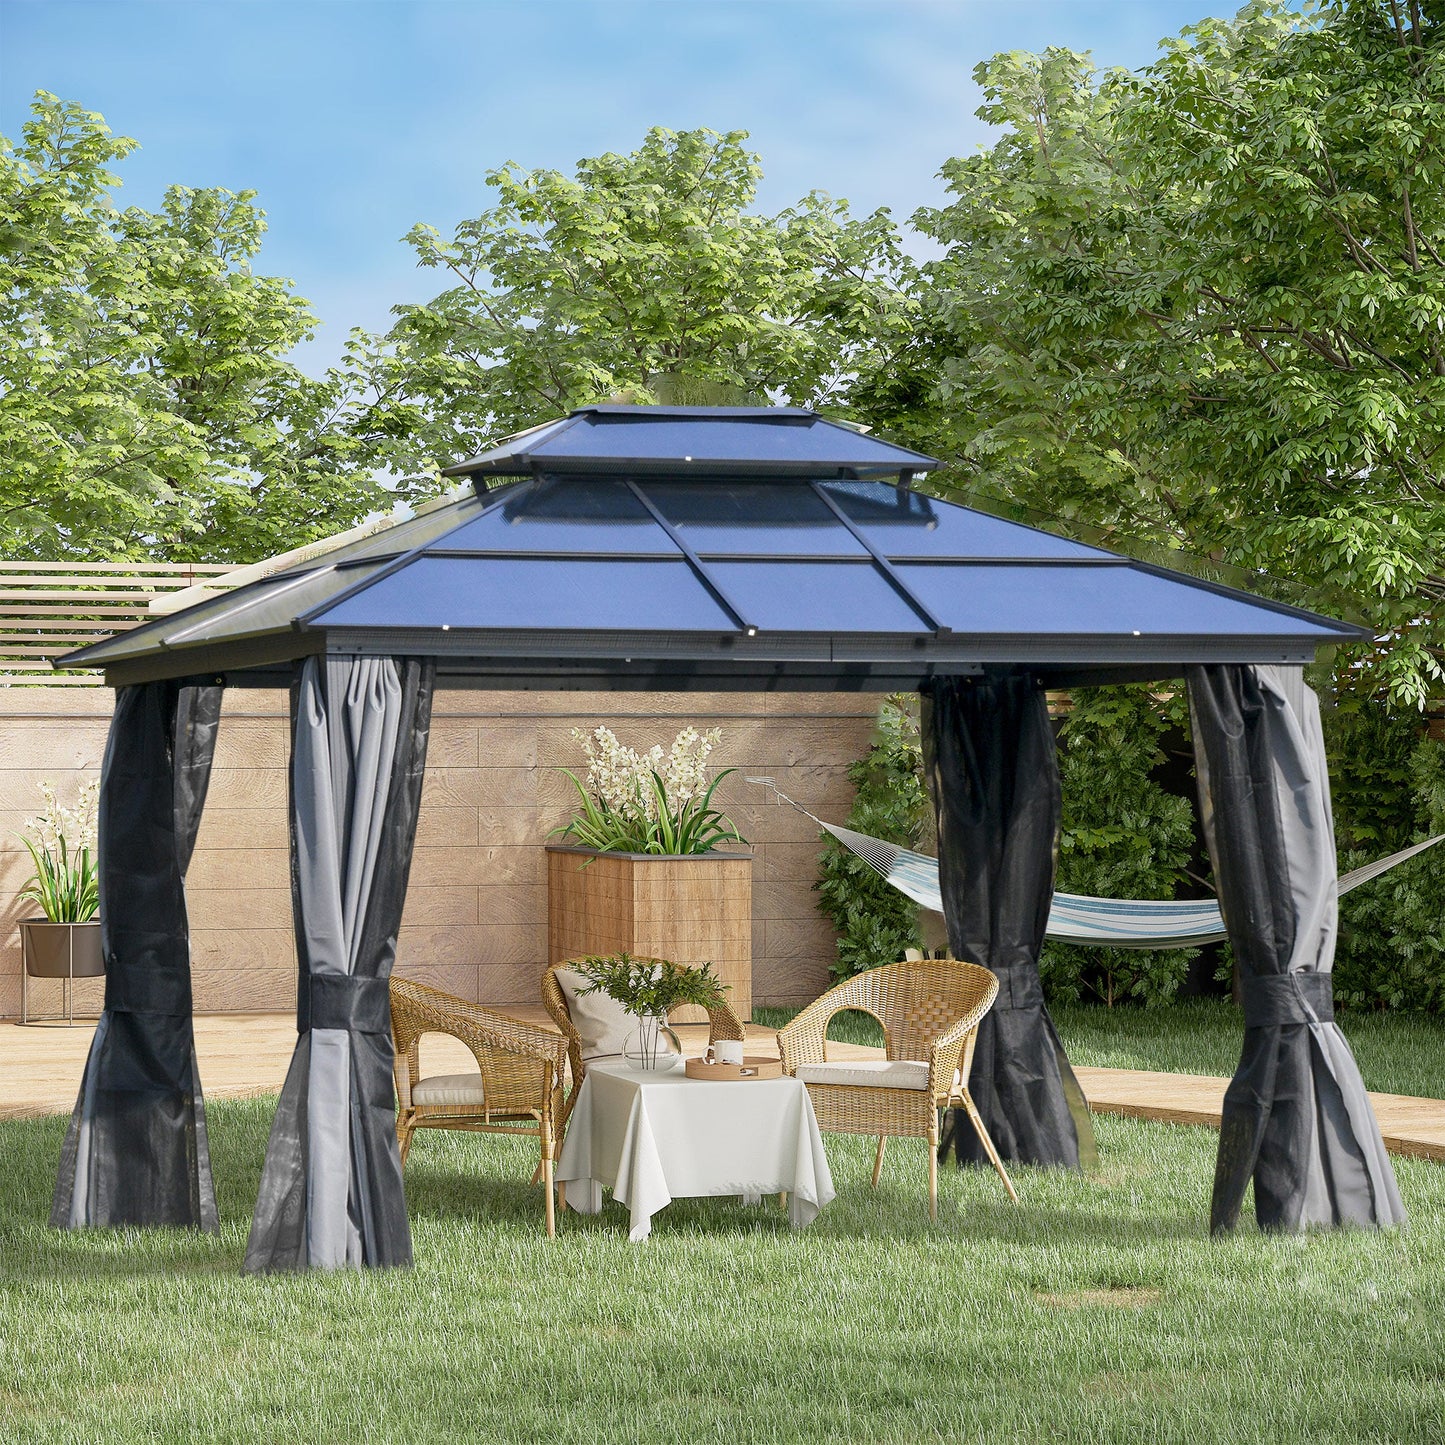 Outdoor and Garden-10x12 Hardtop Gazebo with Aluminum Frame, Polycarbonate Gazebo Canopy with Curtains, Netting for Garden, Patio, Backyard, Grey - Outdoor Style Company